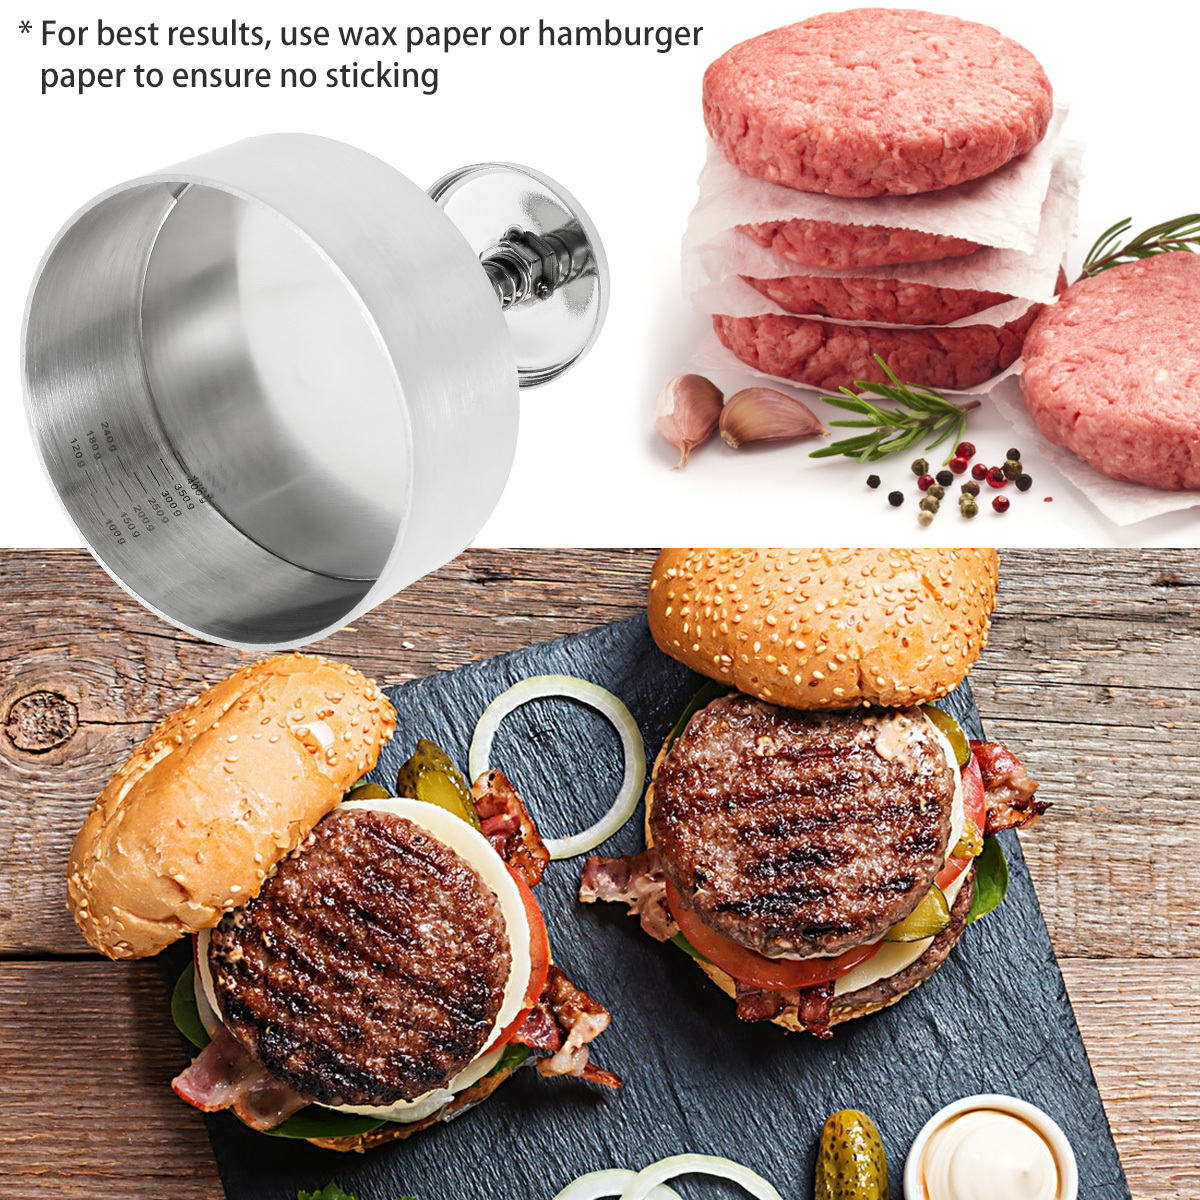 Shape Stainless Steel Homemade Meat Press Machine Deli Meat With